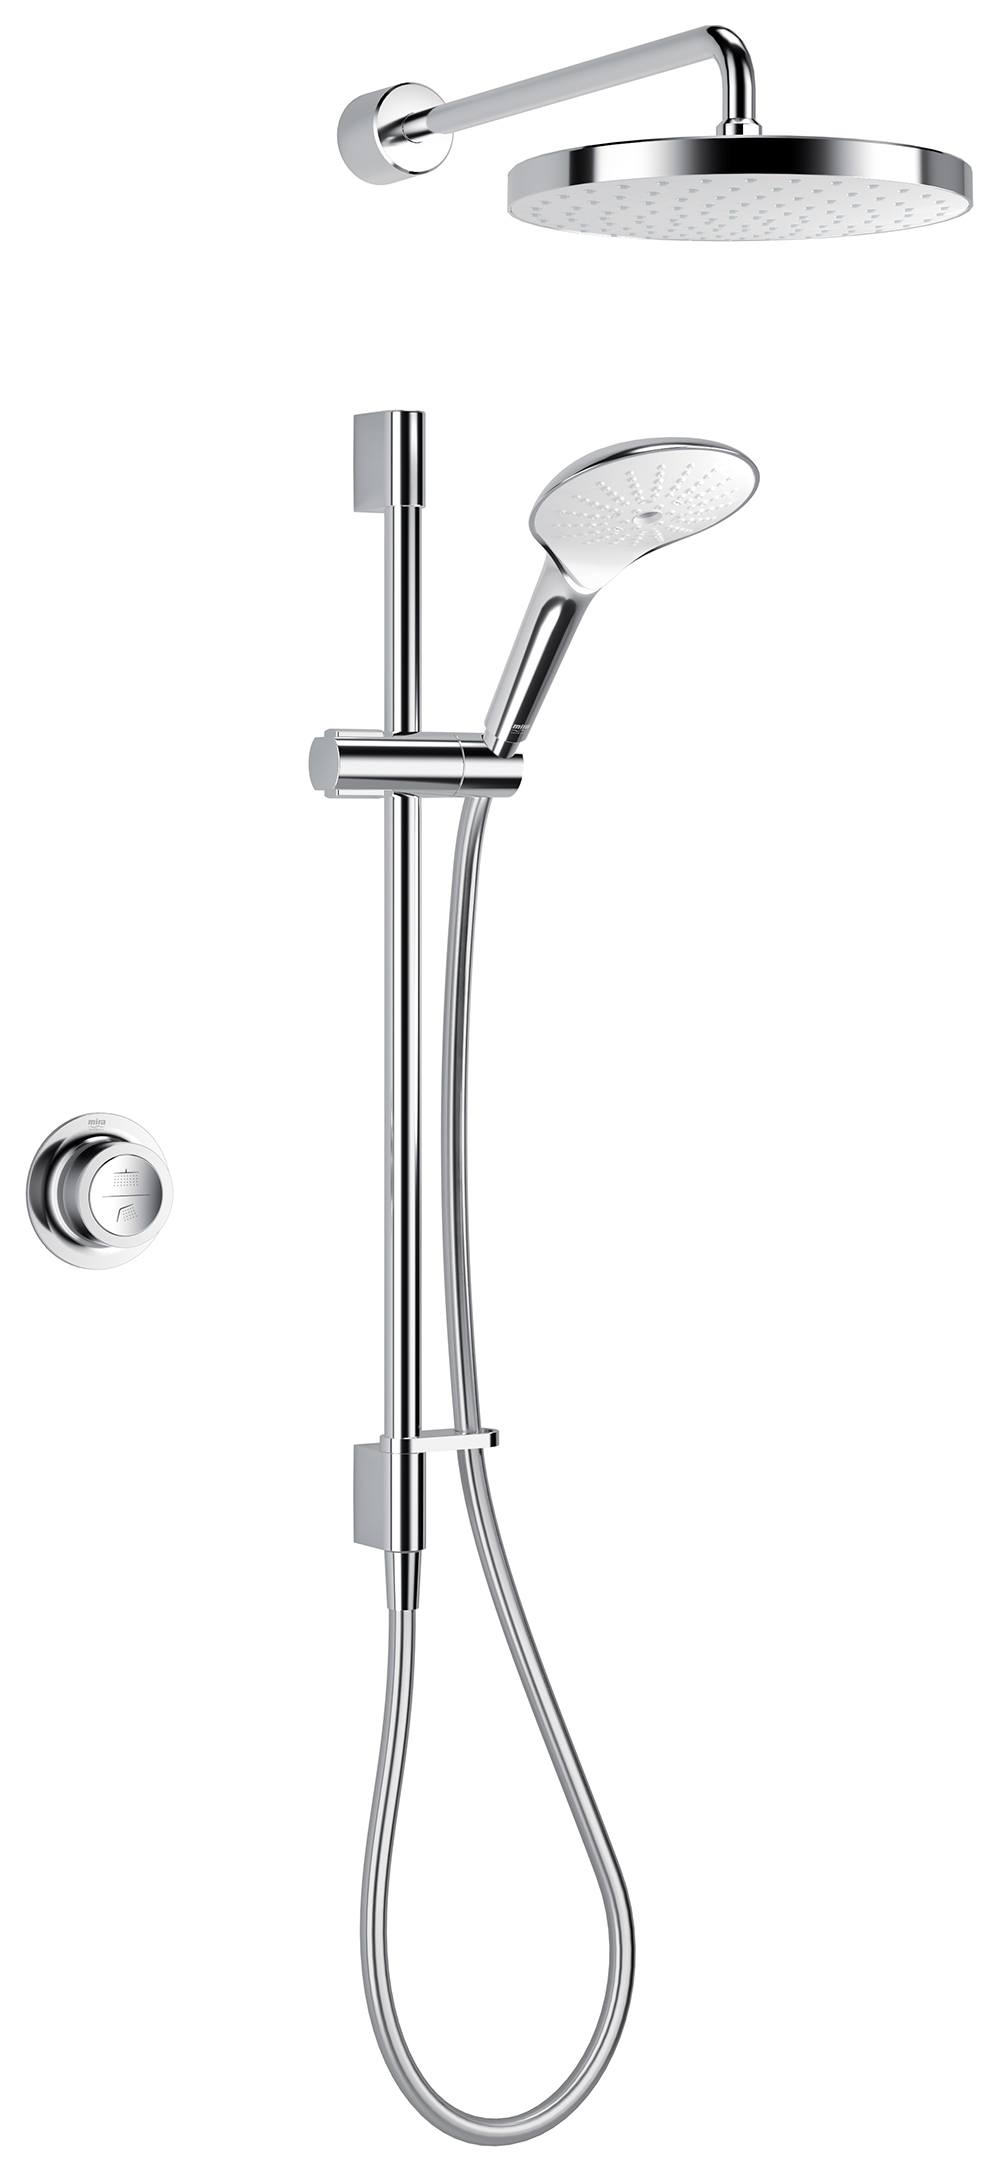 Image of Mira Mode Dual Outlet Gravity Pumped Rear Fed Digital Mixer Shower - Chrome